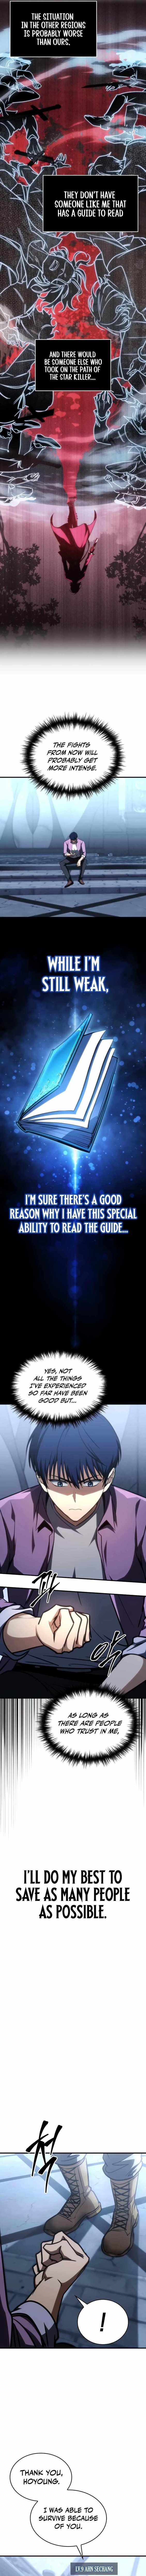 My Exclusive Tower Guide Chapter 12